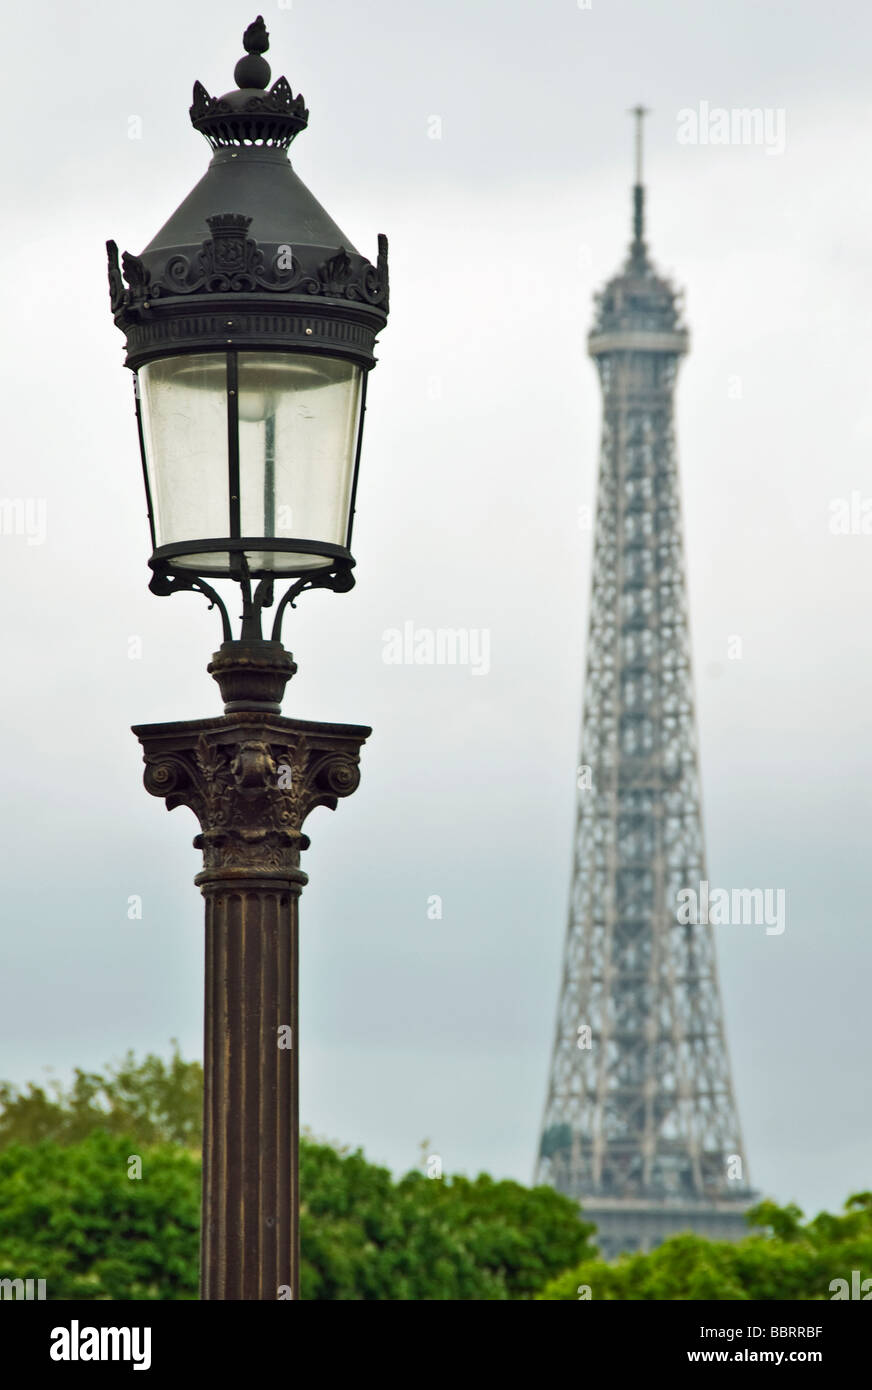 France Paris Champ-de-Mars Lamp Post In Front Of Eiffel Tower cloudy overcast sky grey Stock Photo